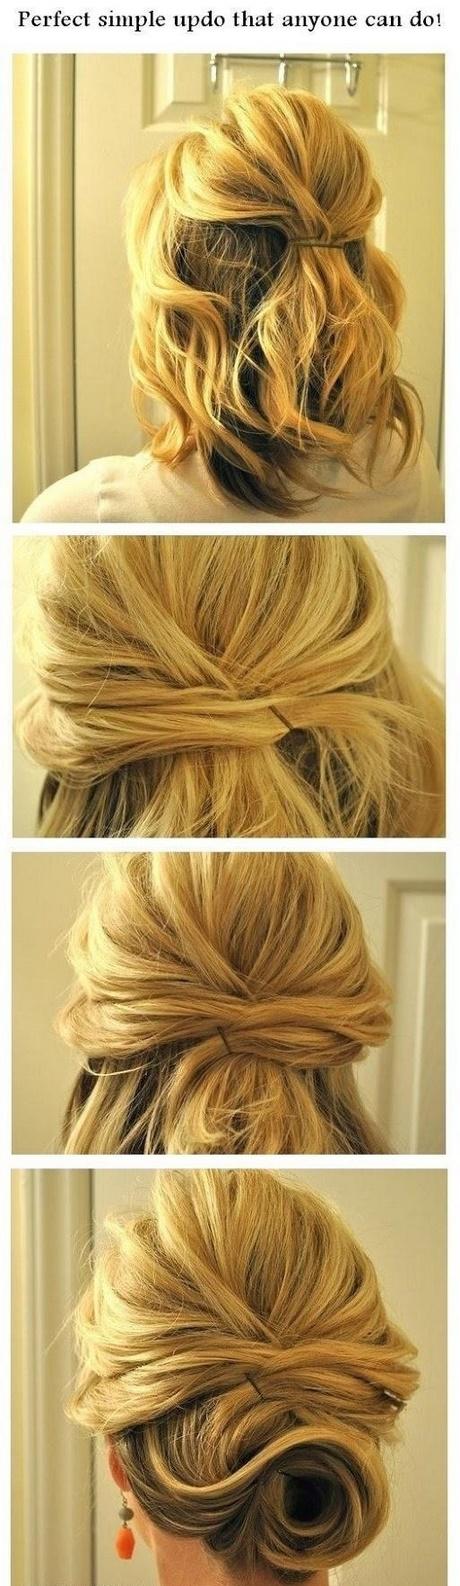 Easy hairstyles for mid length hair easy-hairstyles-for-mid-length-hair-33_19